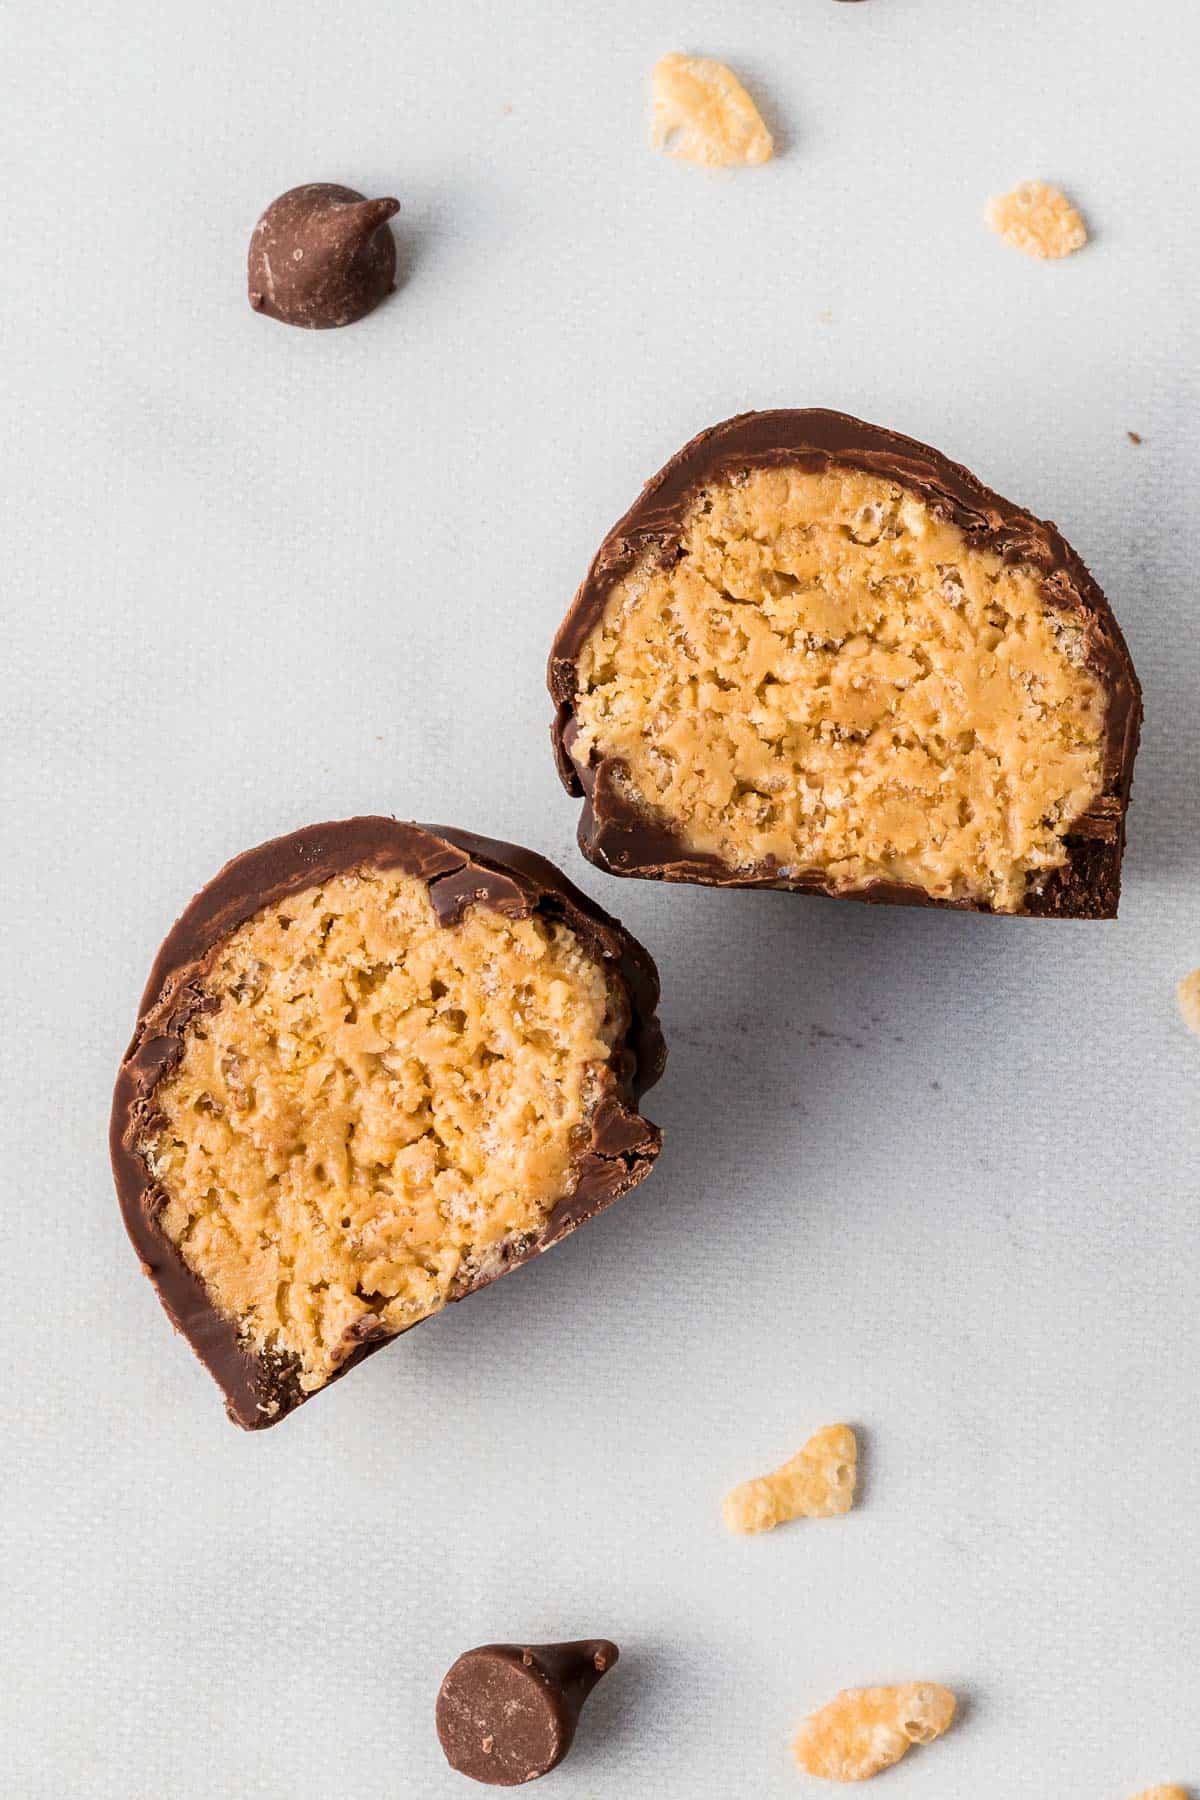 peanut butter ball cut open to show the filling